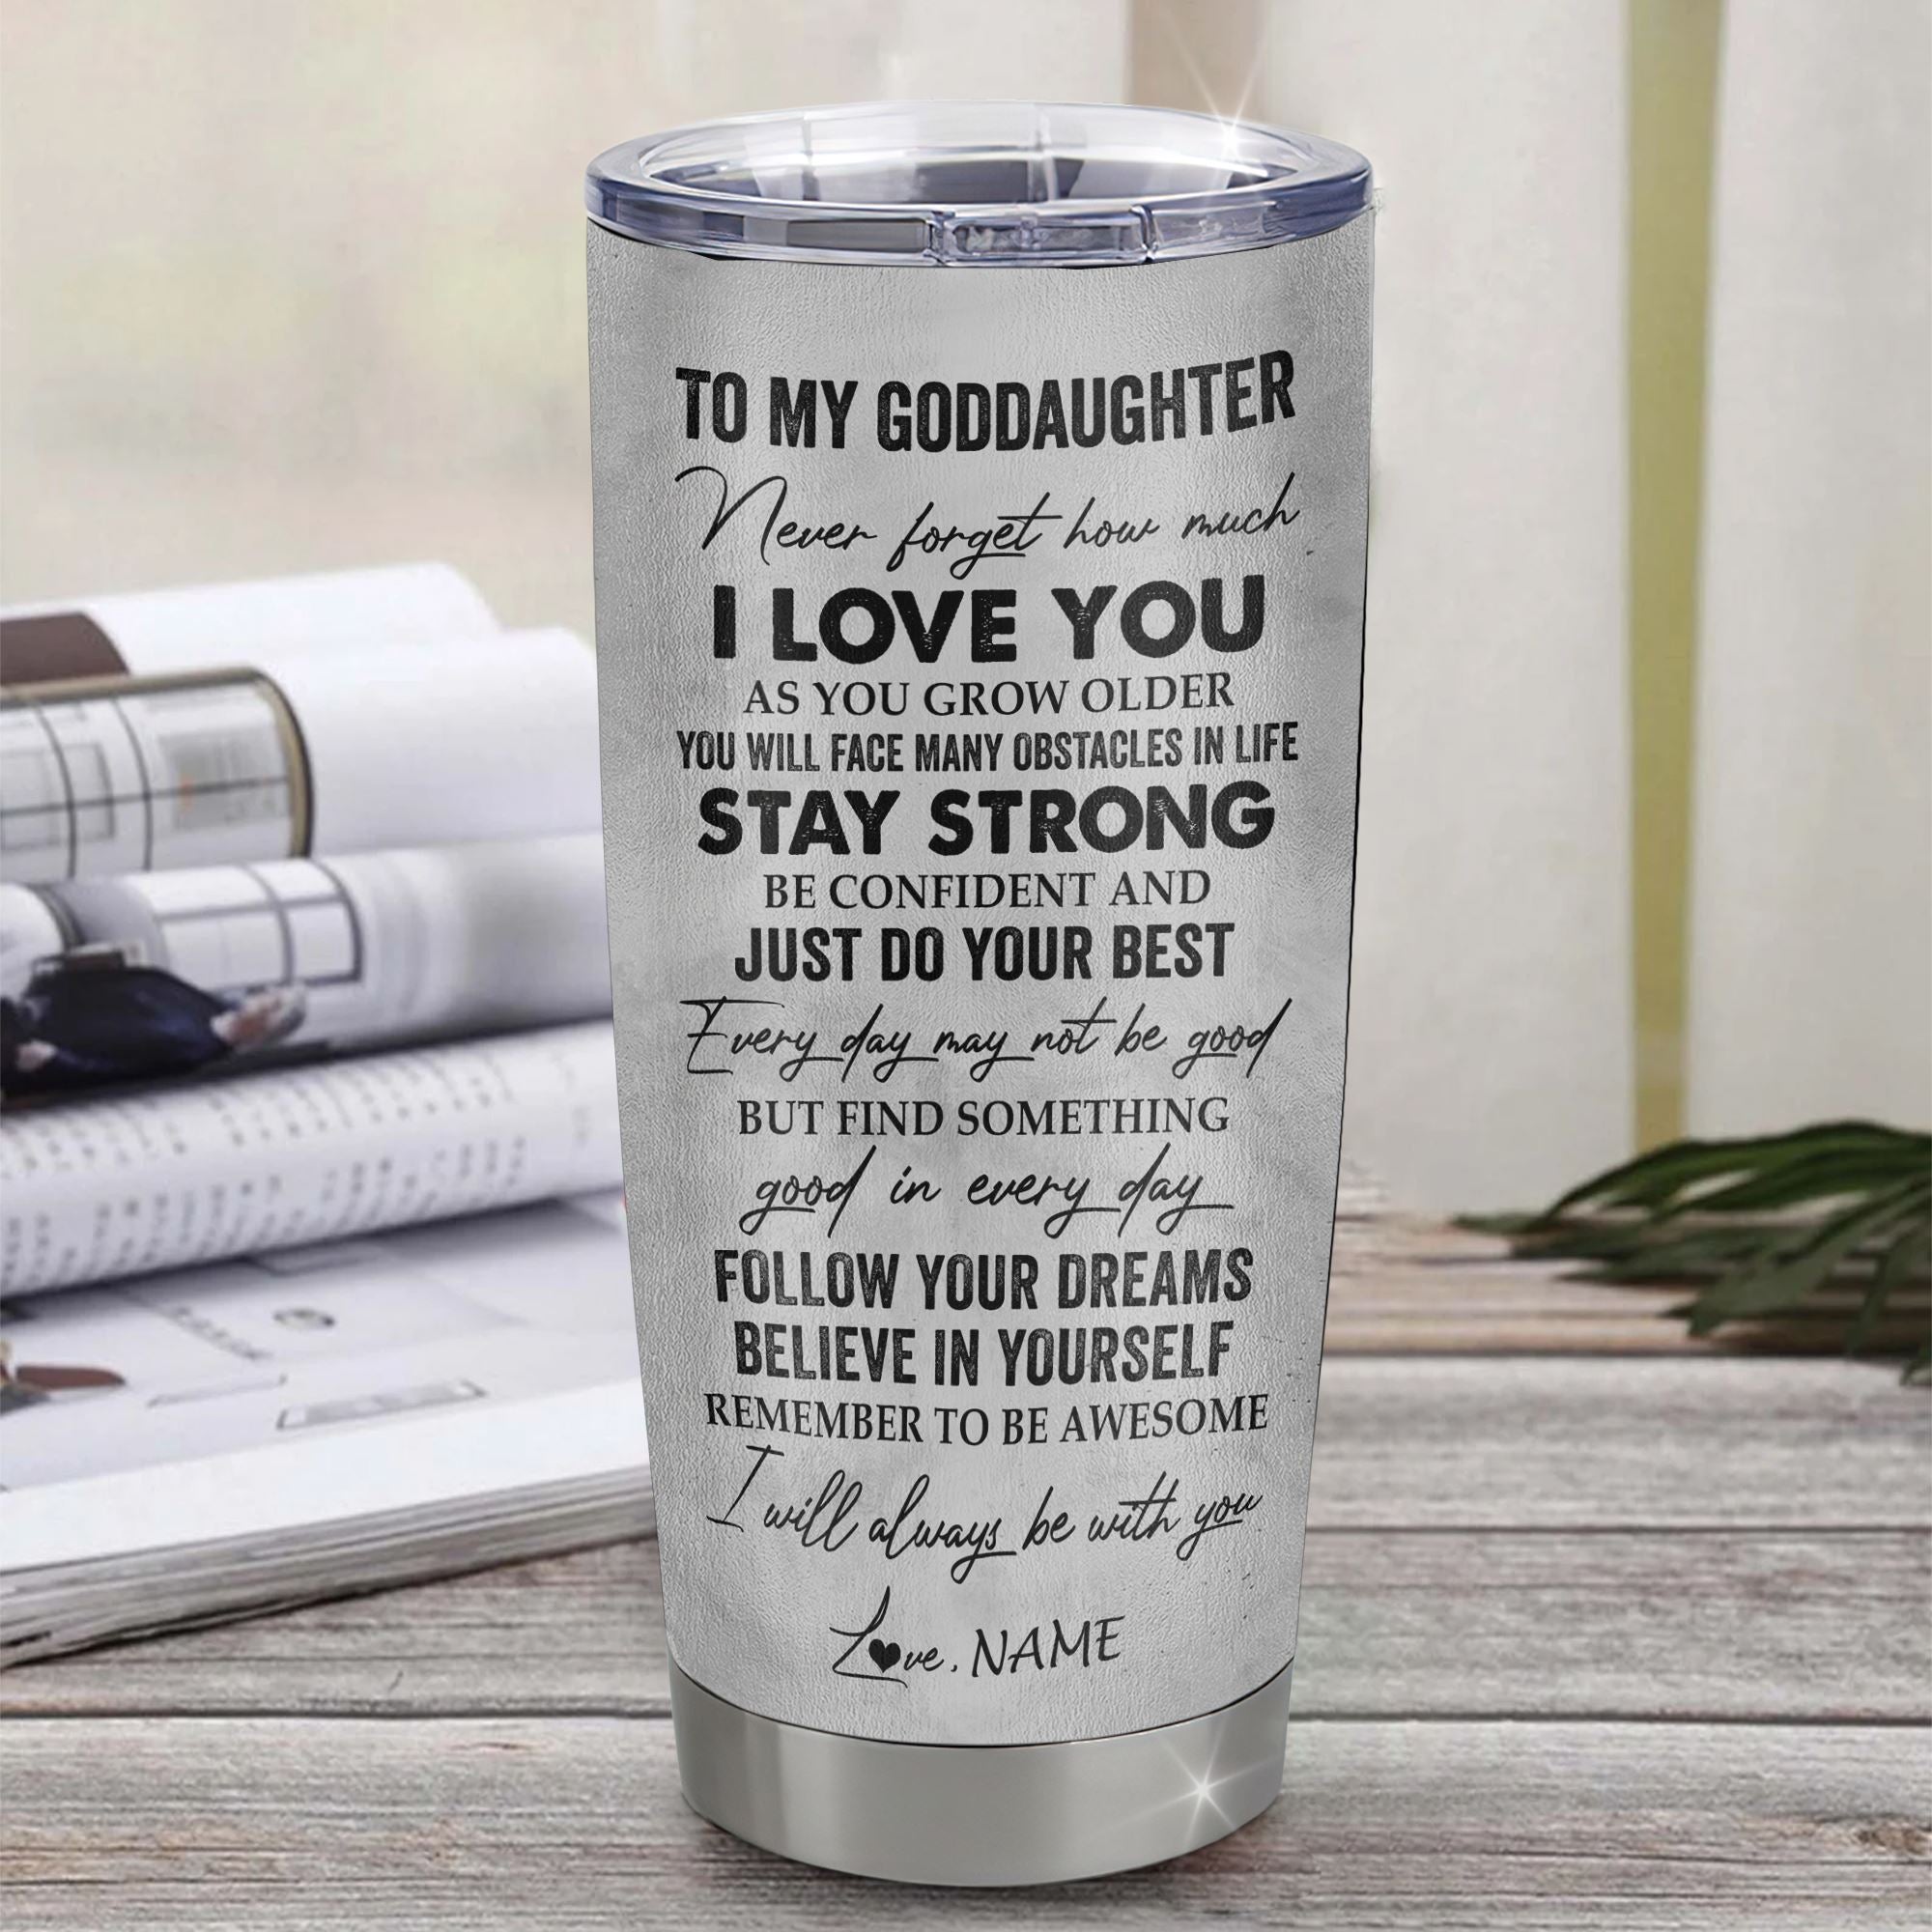 Personalized_To_My_Goddaughter_Tumbler_From_Godfather_Stainless_Steel_Cup_I_Love_You_With_All_My_Heart_Goddaughter_Birthday_Christmas_Travel_Mug_Tumbler_mockup_1.jpg